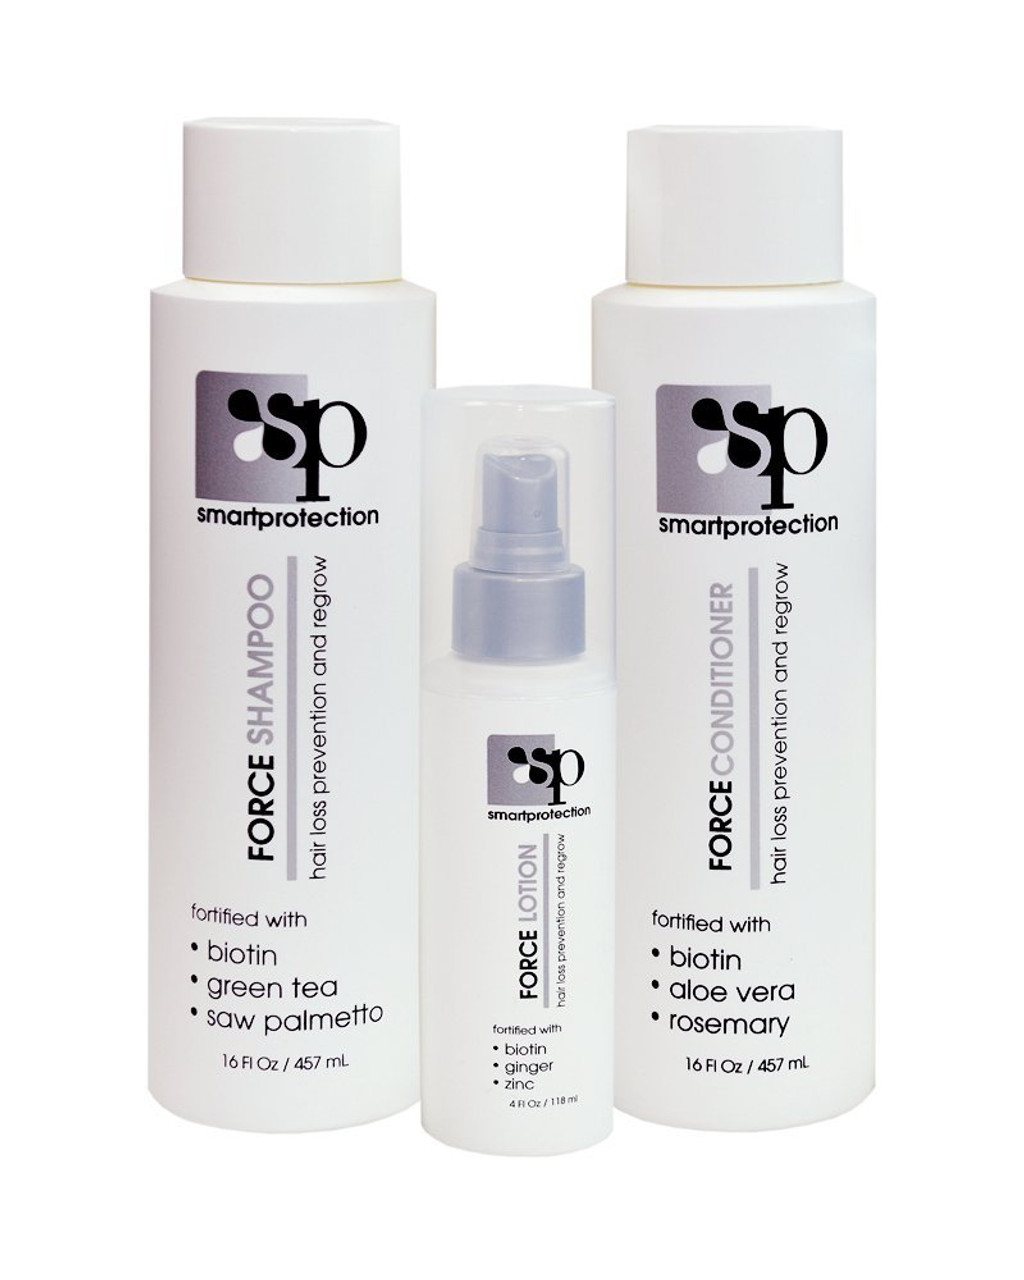 FORCE - Hair Loss Prevention and Regrow Treatment Kit by Smart Protection